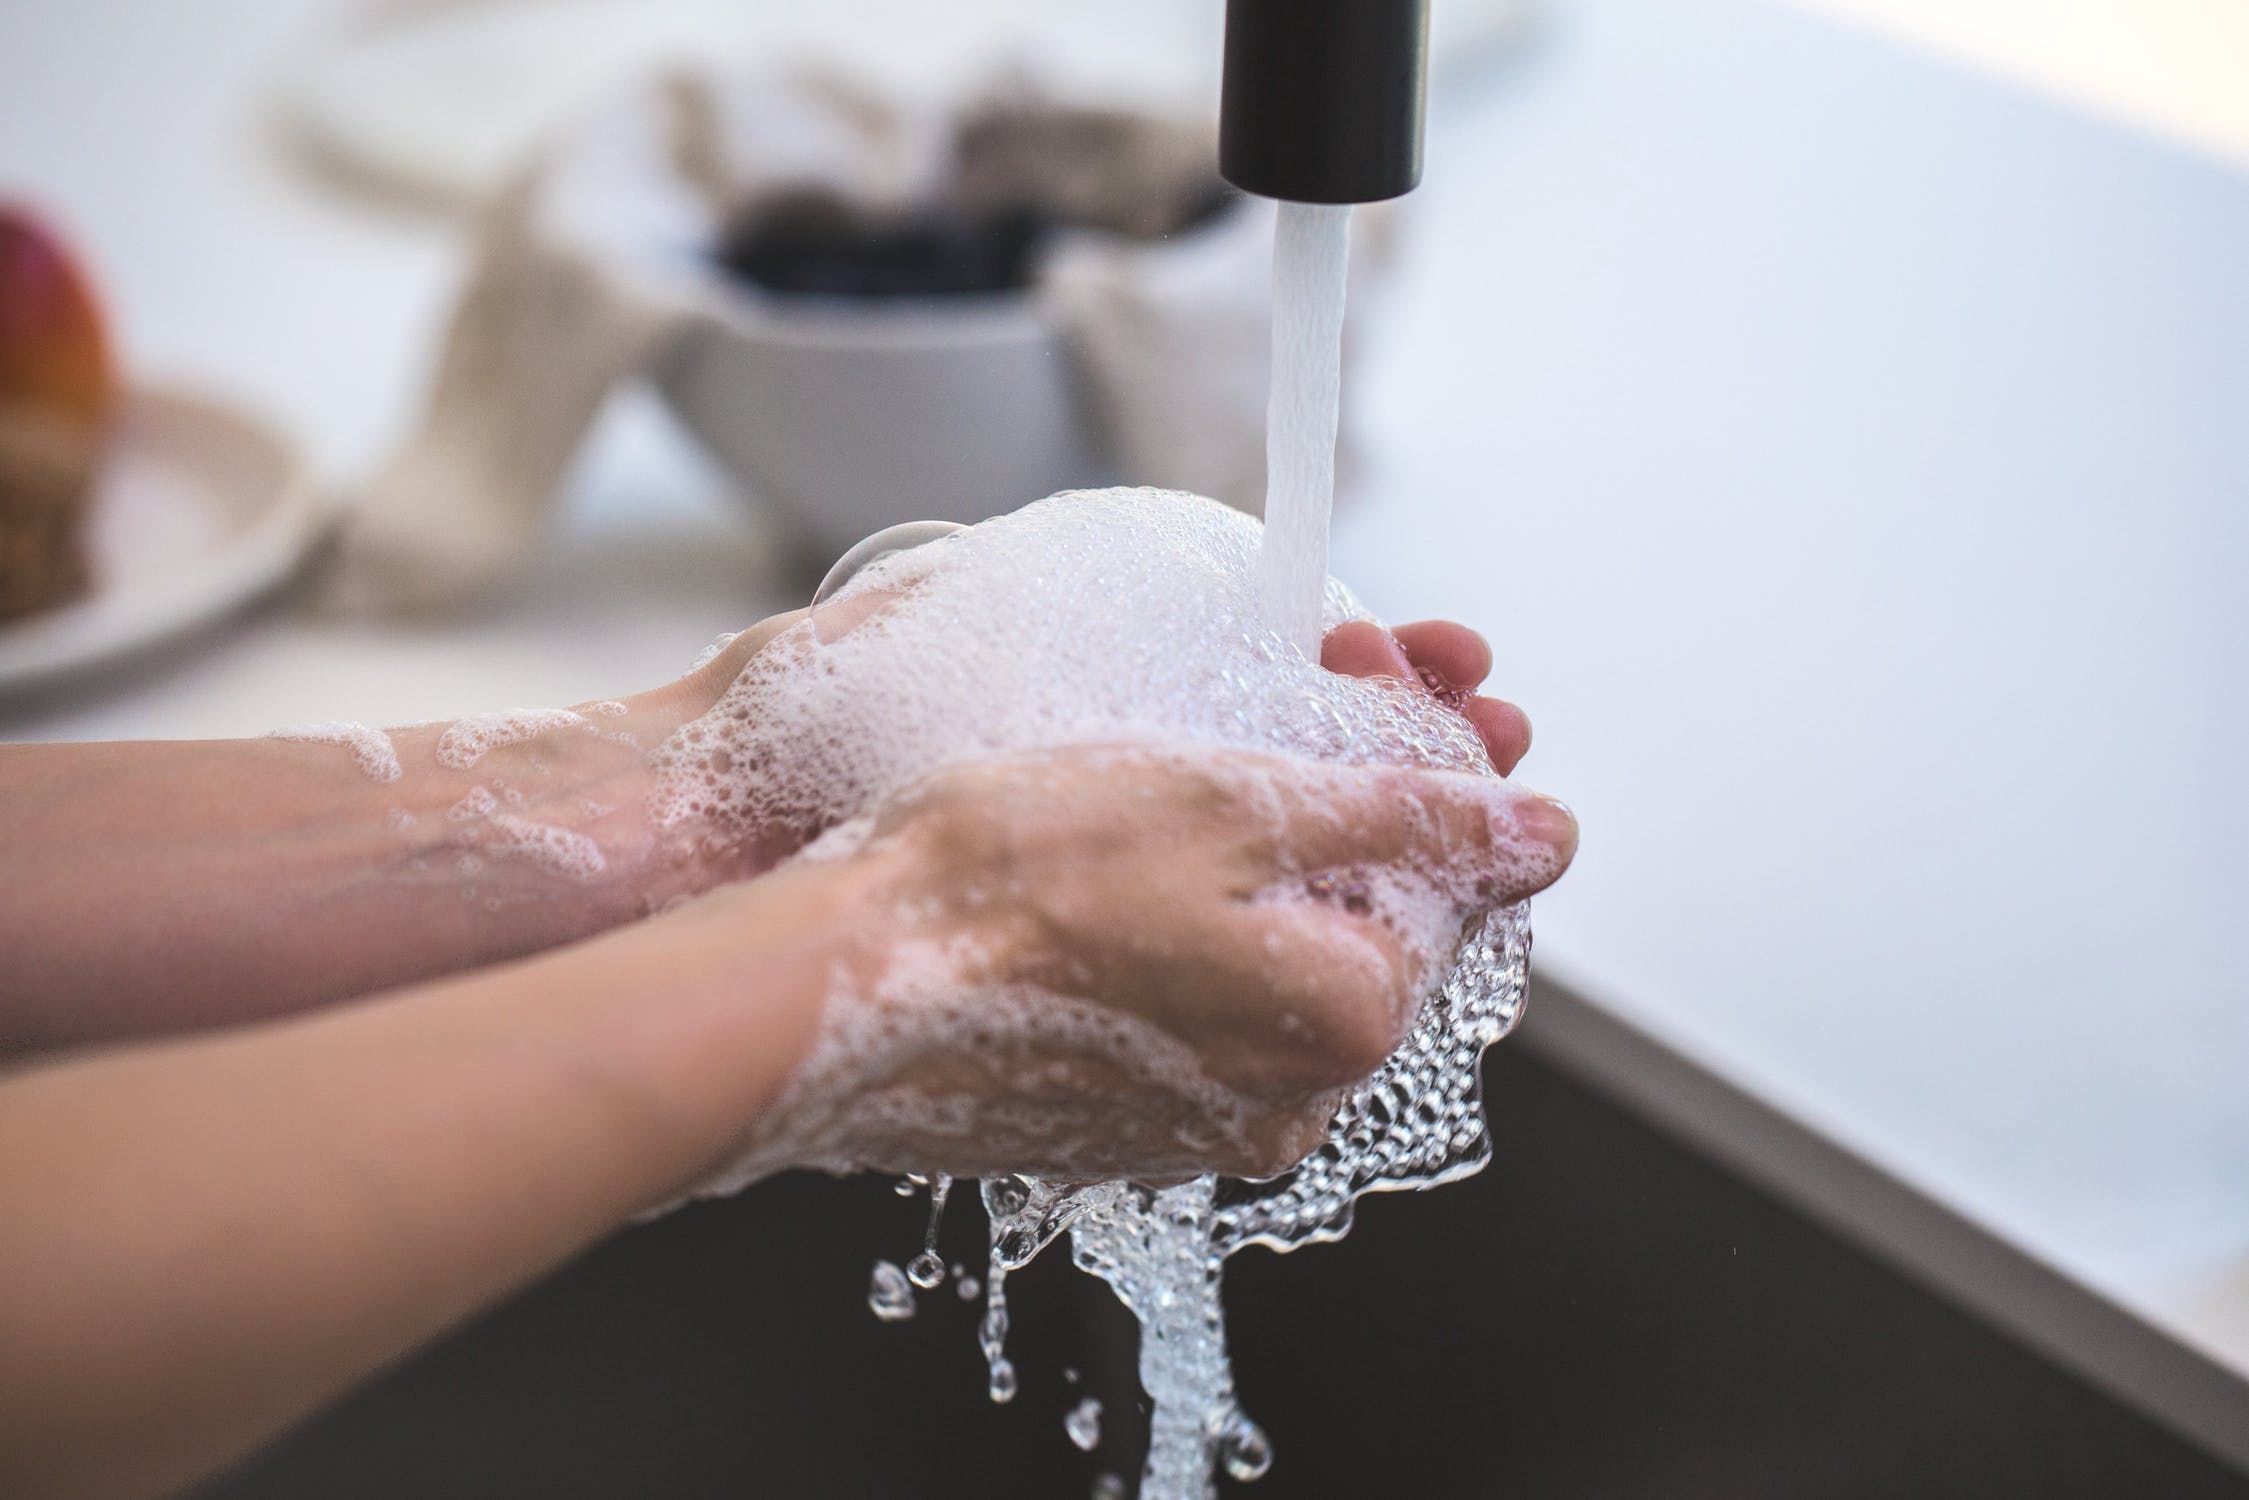 5 Tips to Practicing Better Hygiene and Making it Habitual